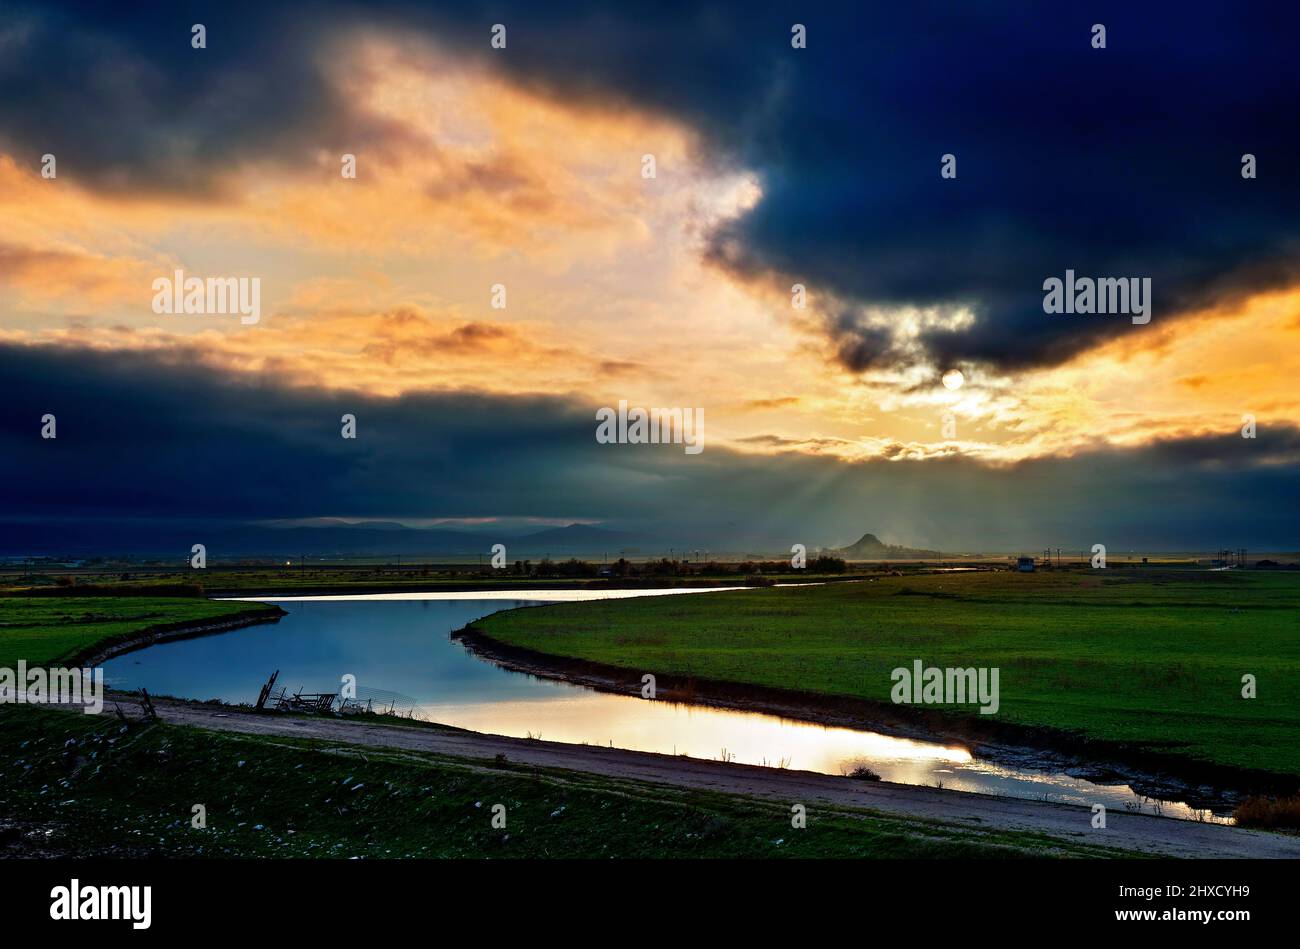 Sunset at a canal next to Karla (or 'Carla') lake, Larissa & Magnisia prefectures, Thessaly, Greece. Stock Photo